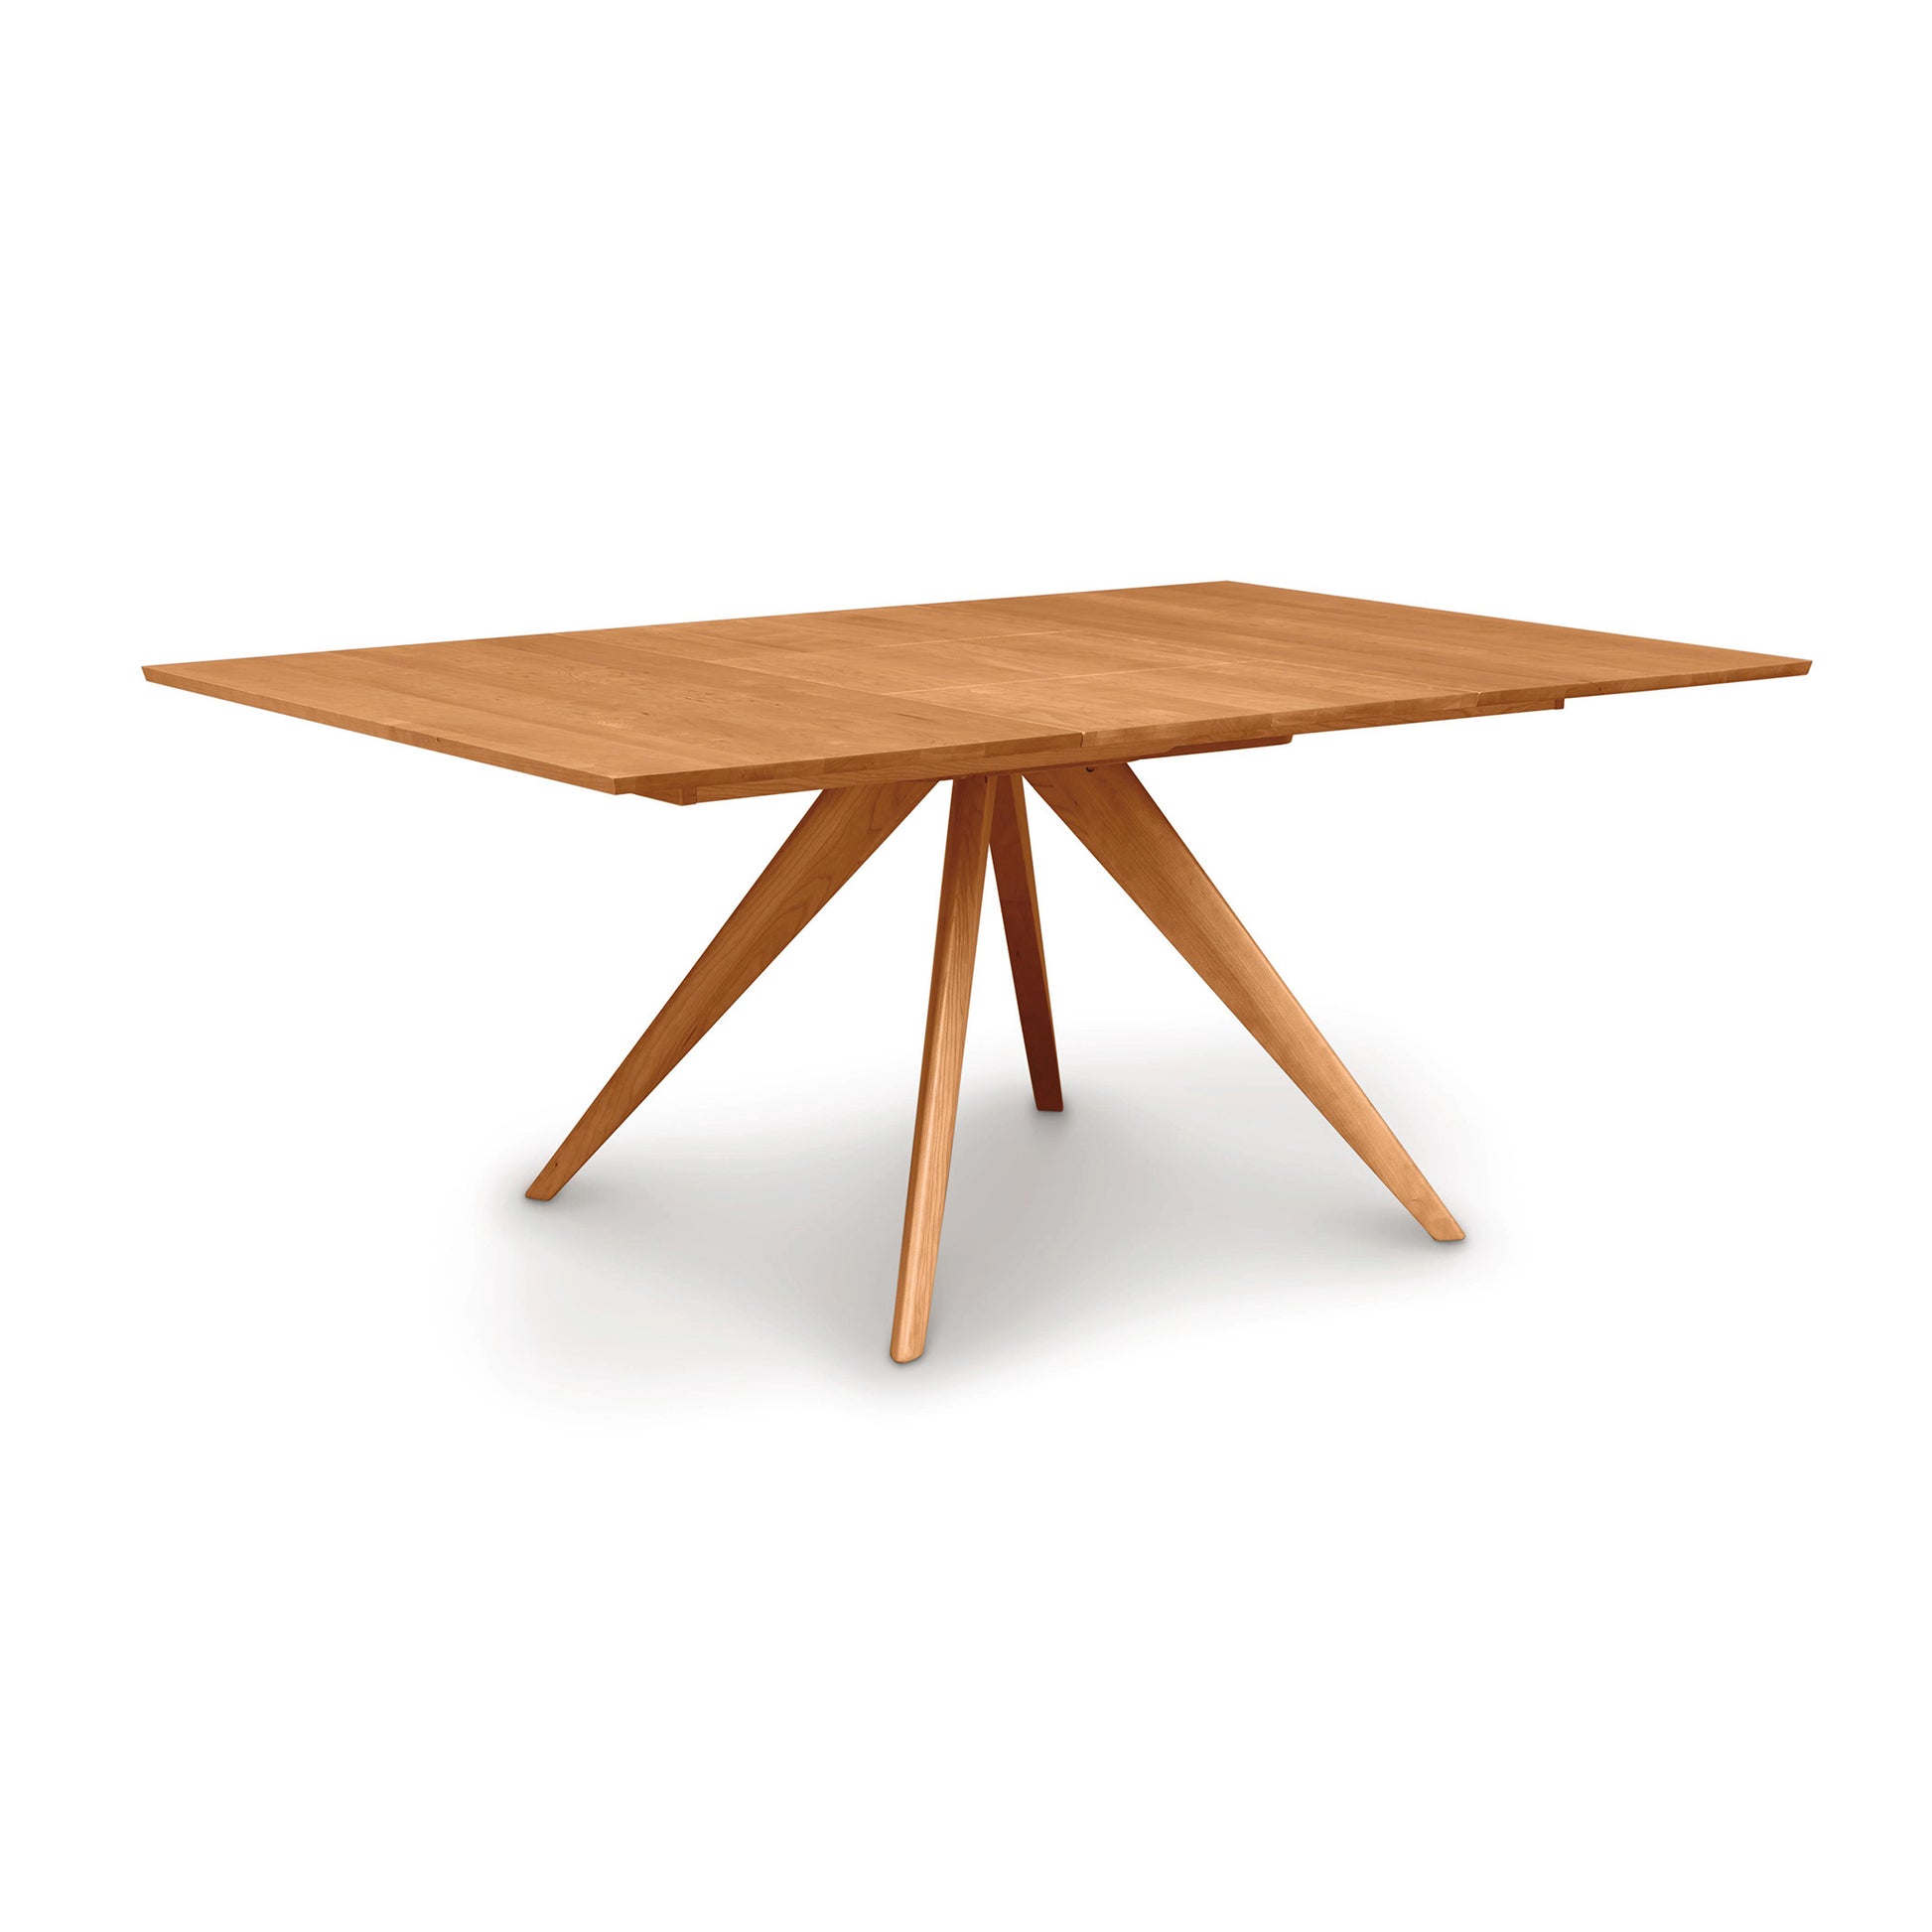 A Catalina Square Extension Dining Table crafted from sustainable hardwoods by Copeland Furniture, featuring a tapered, geometric base on a white background.